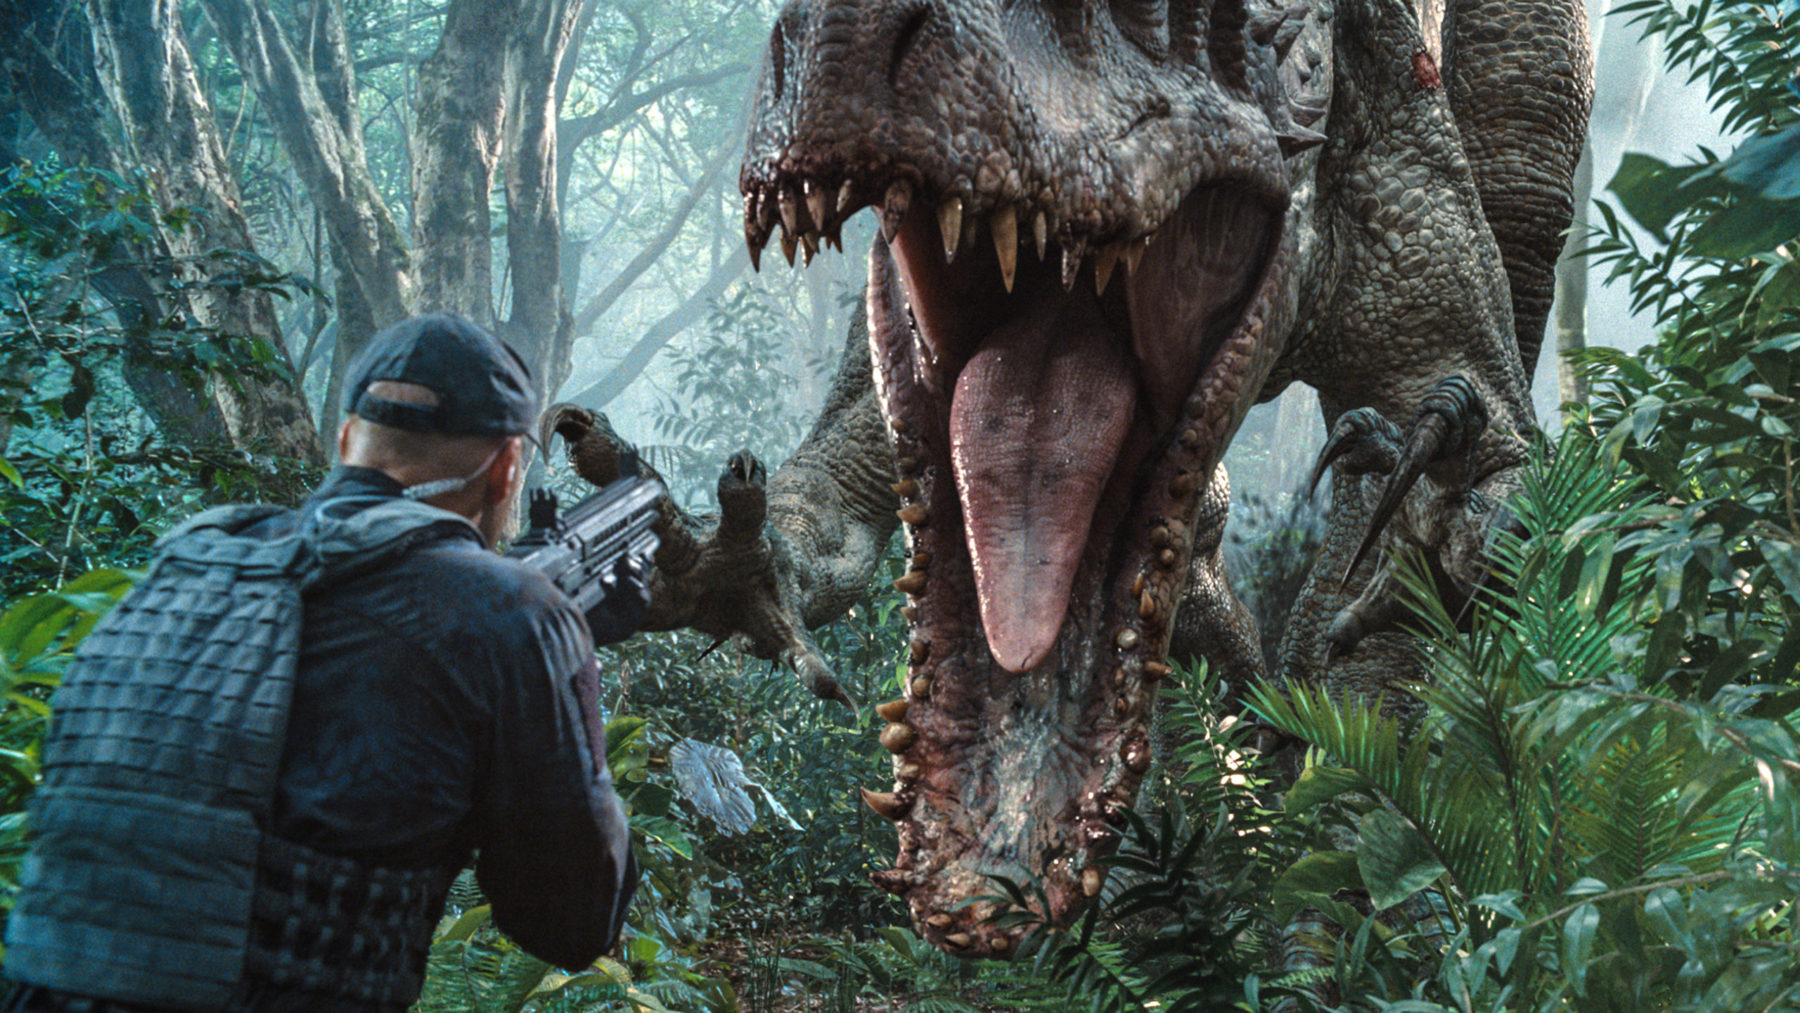 https://bloody-disgusting.com/movie/3635498/universal-pushes-jurassic-world-dominion-release-way-june-10-2020/